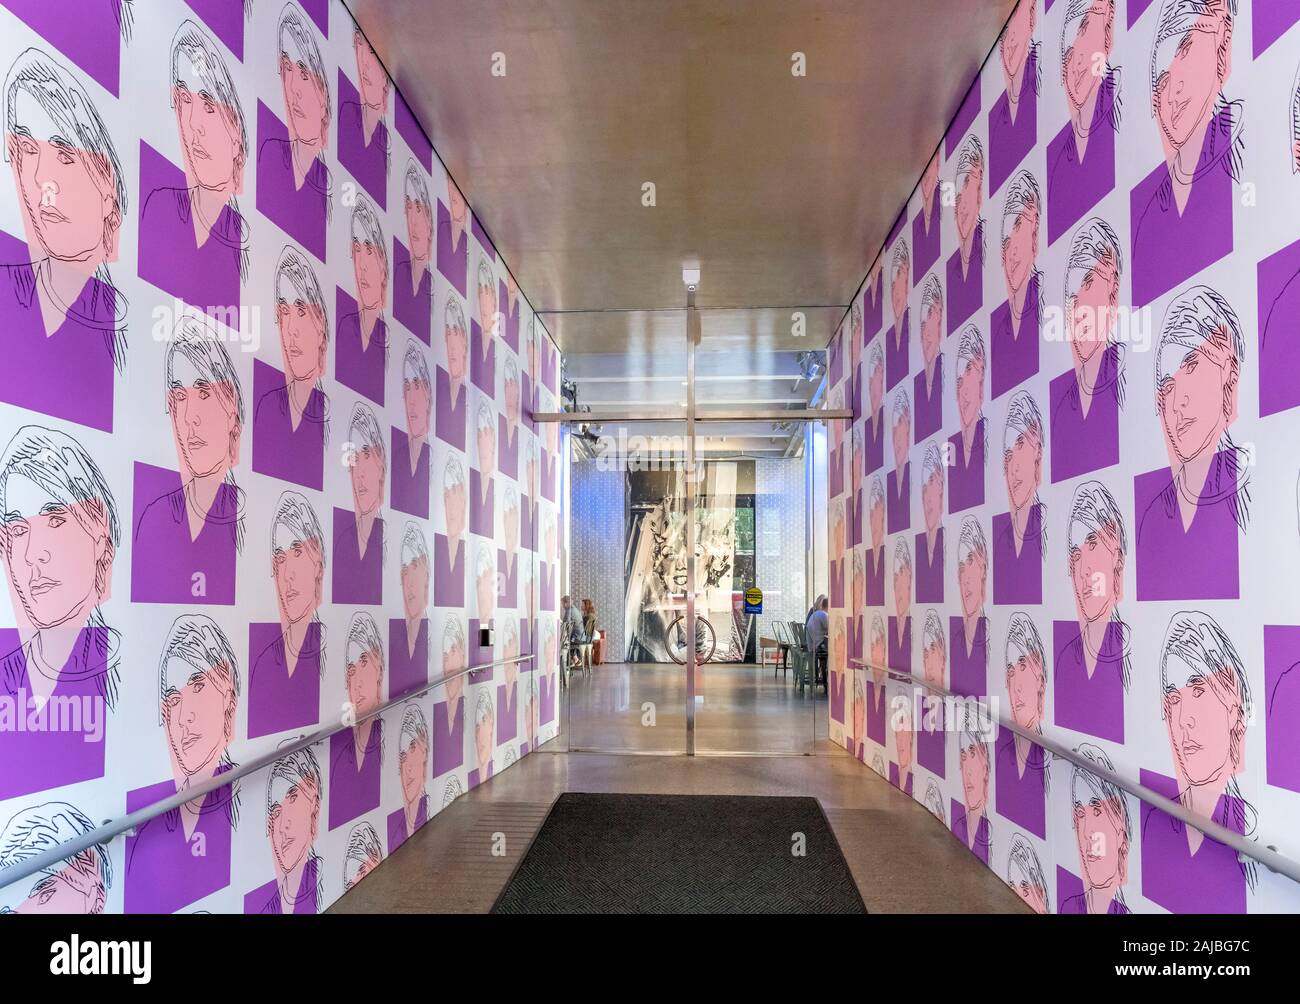 Entrance to the Andy Warhol Museum, Pittsburgh, Pennsylvania, USA. The walls are decorated with Warhol's “Self-Portrait 1978, color screenprint on wallpaper” Stock Photo